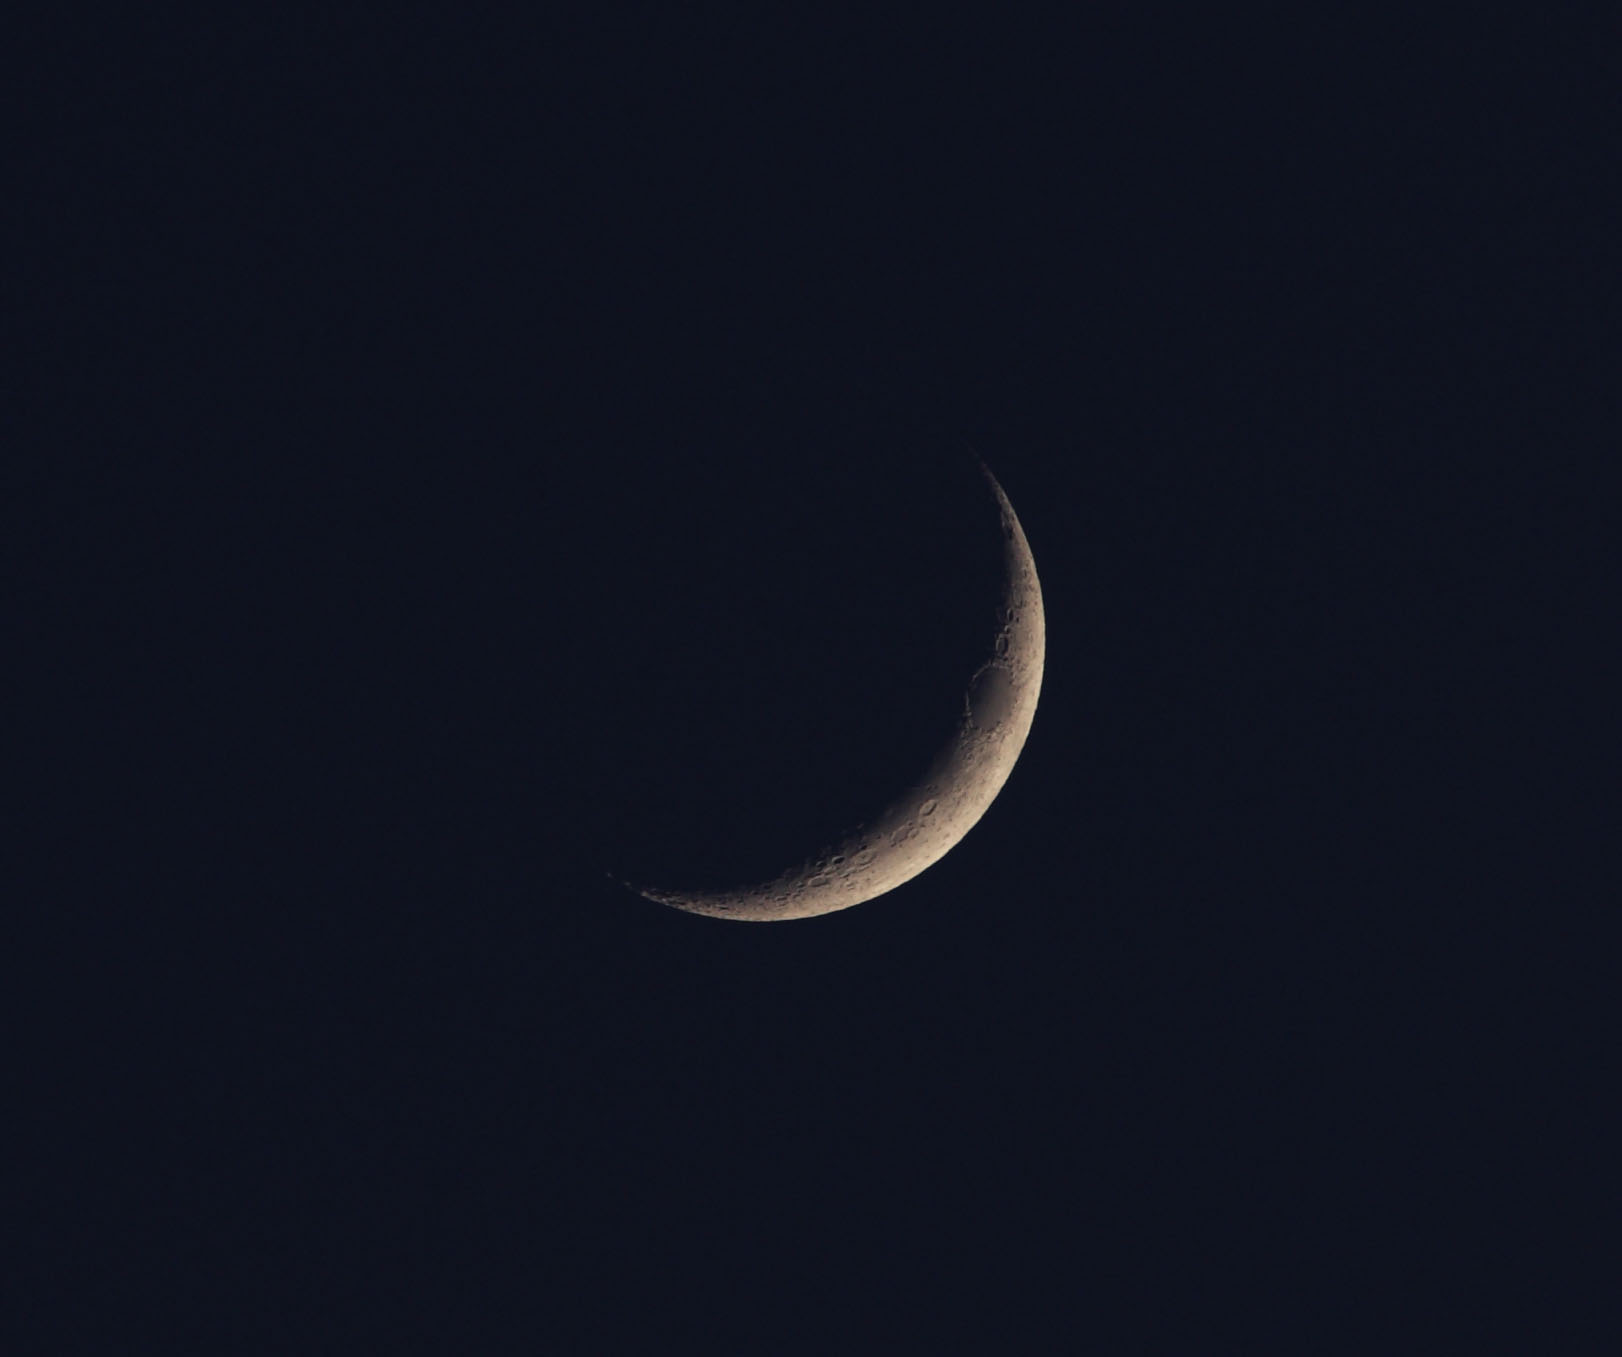 photo,material,free,landscape,picture,stock photo,Creative Commons,A crescent moon, crater, The surface of the moon, The moon, At dark